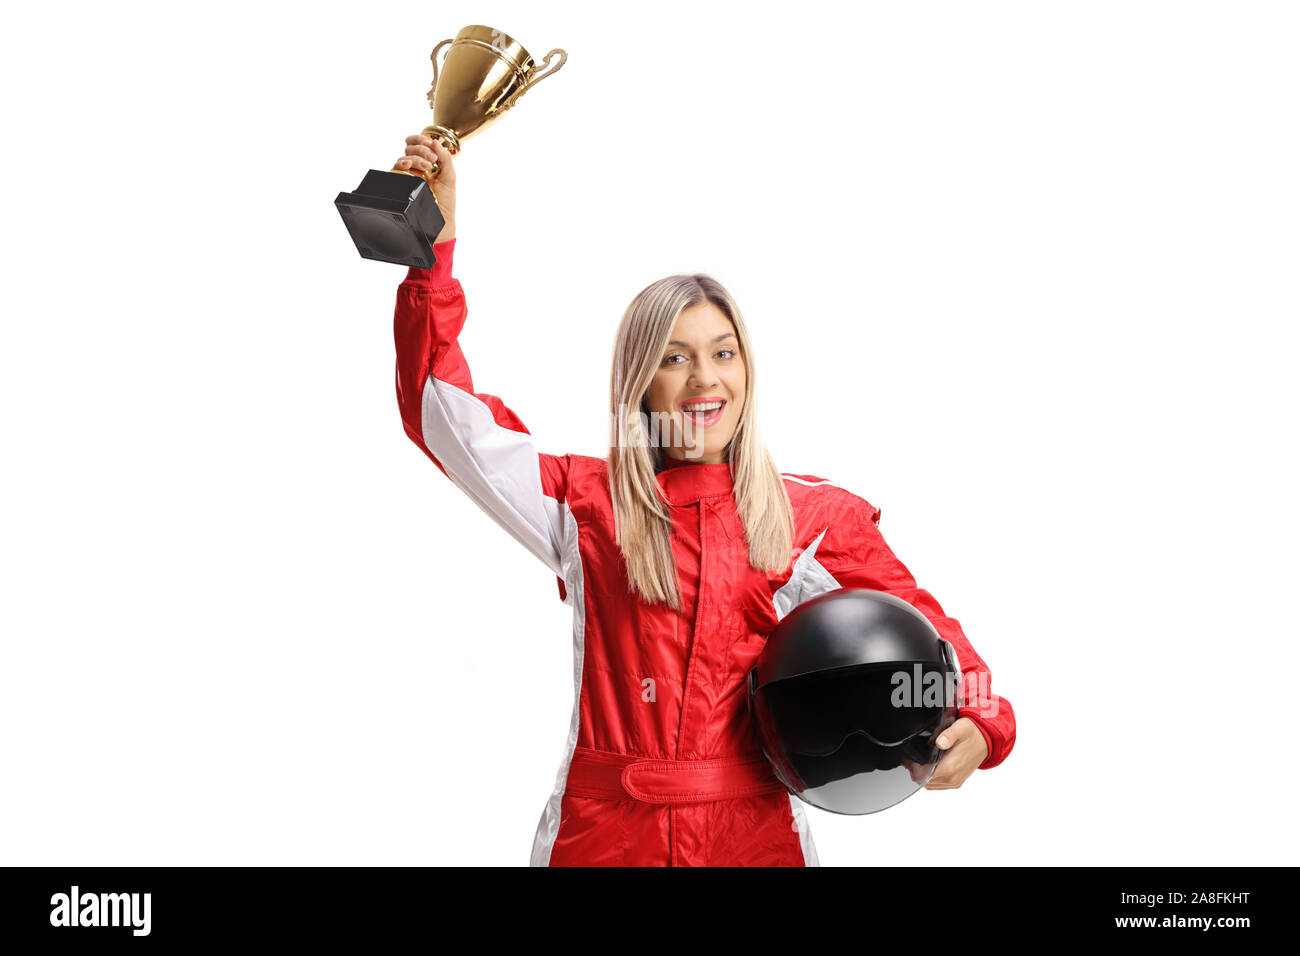 Young female car racer with a golden trophy cup isolated on white background Stock Photo